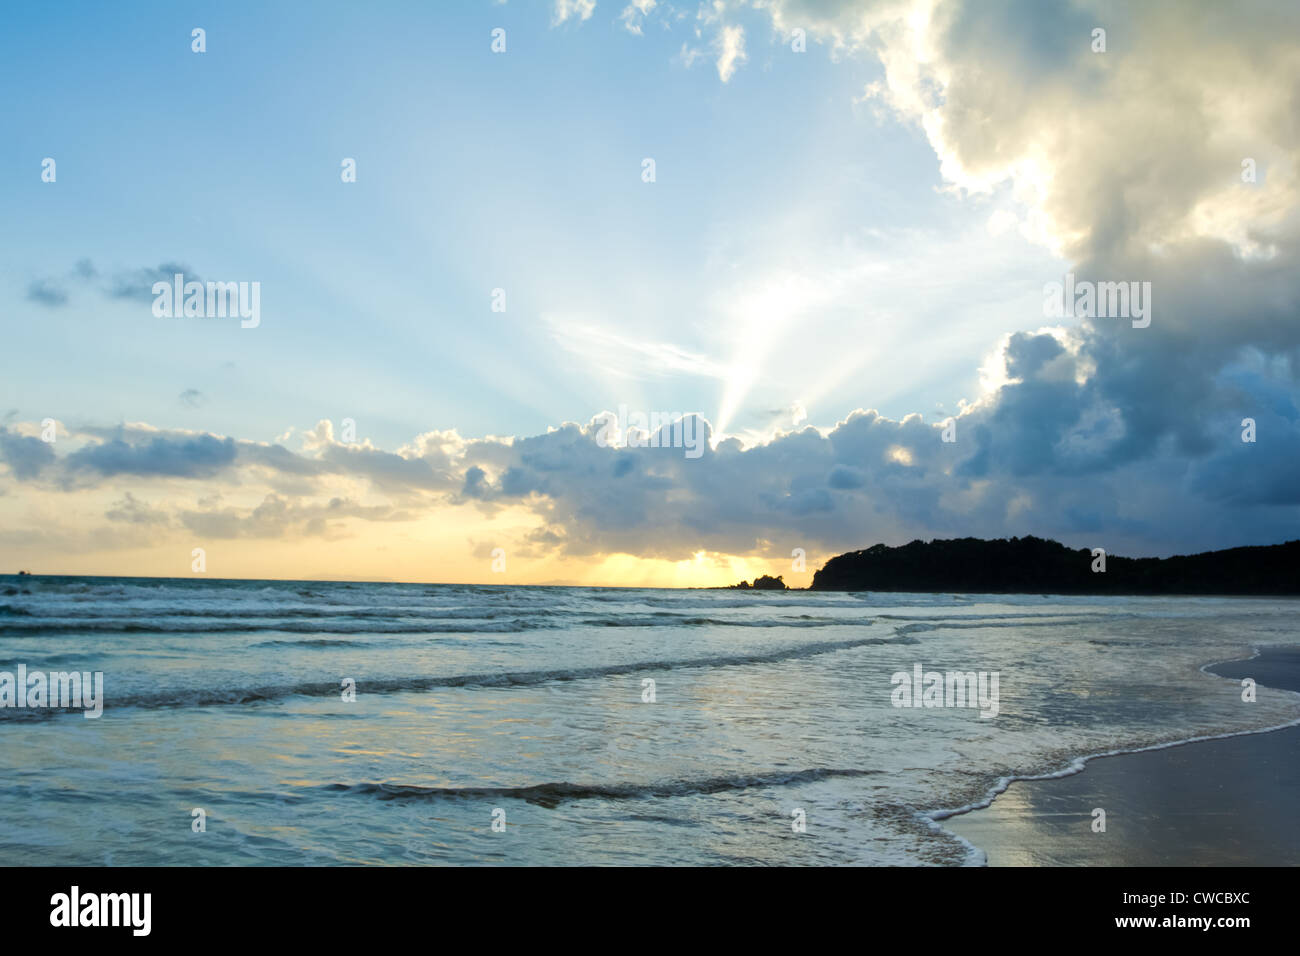 Tropical Beach Sunset Sky With Lighted Clouds Stock Photo Alamy